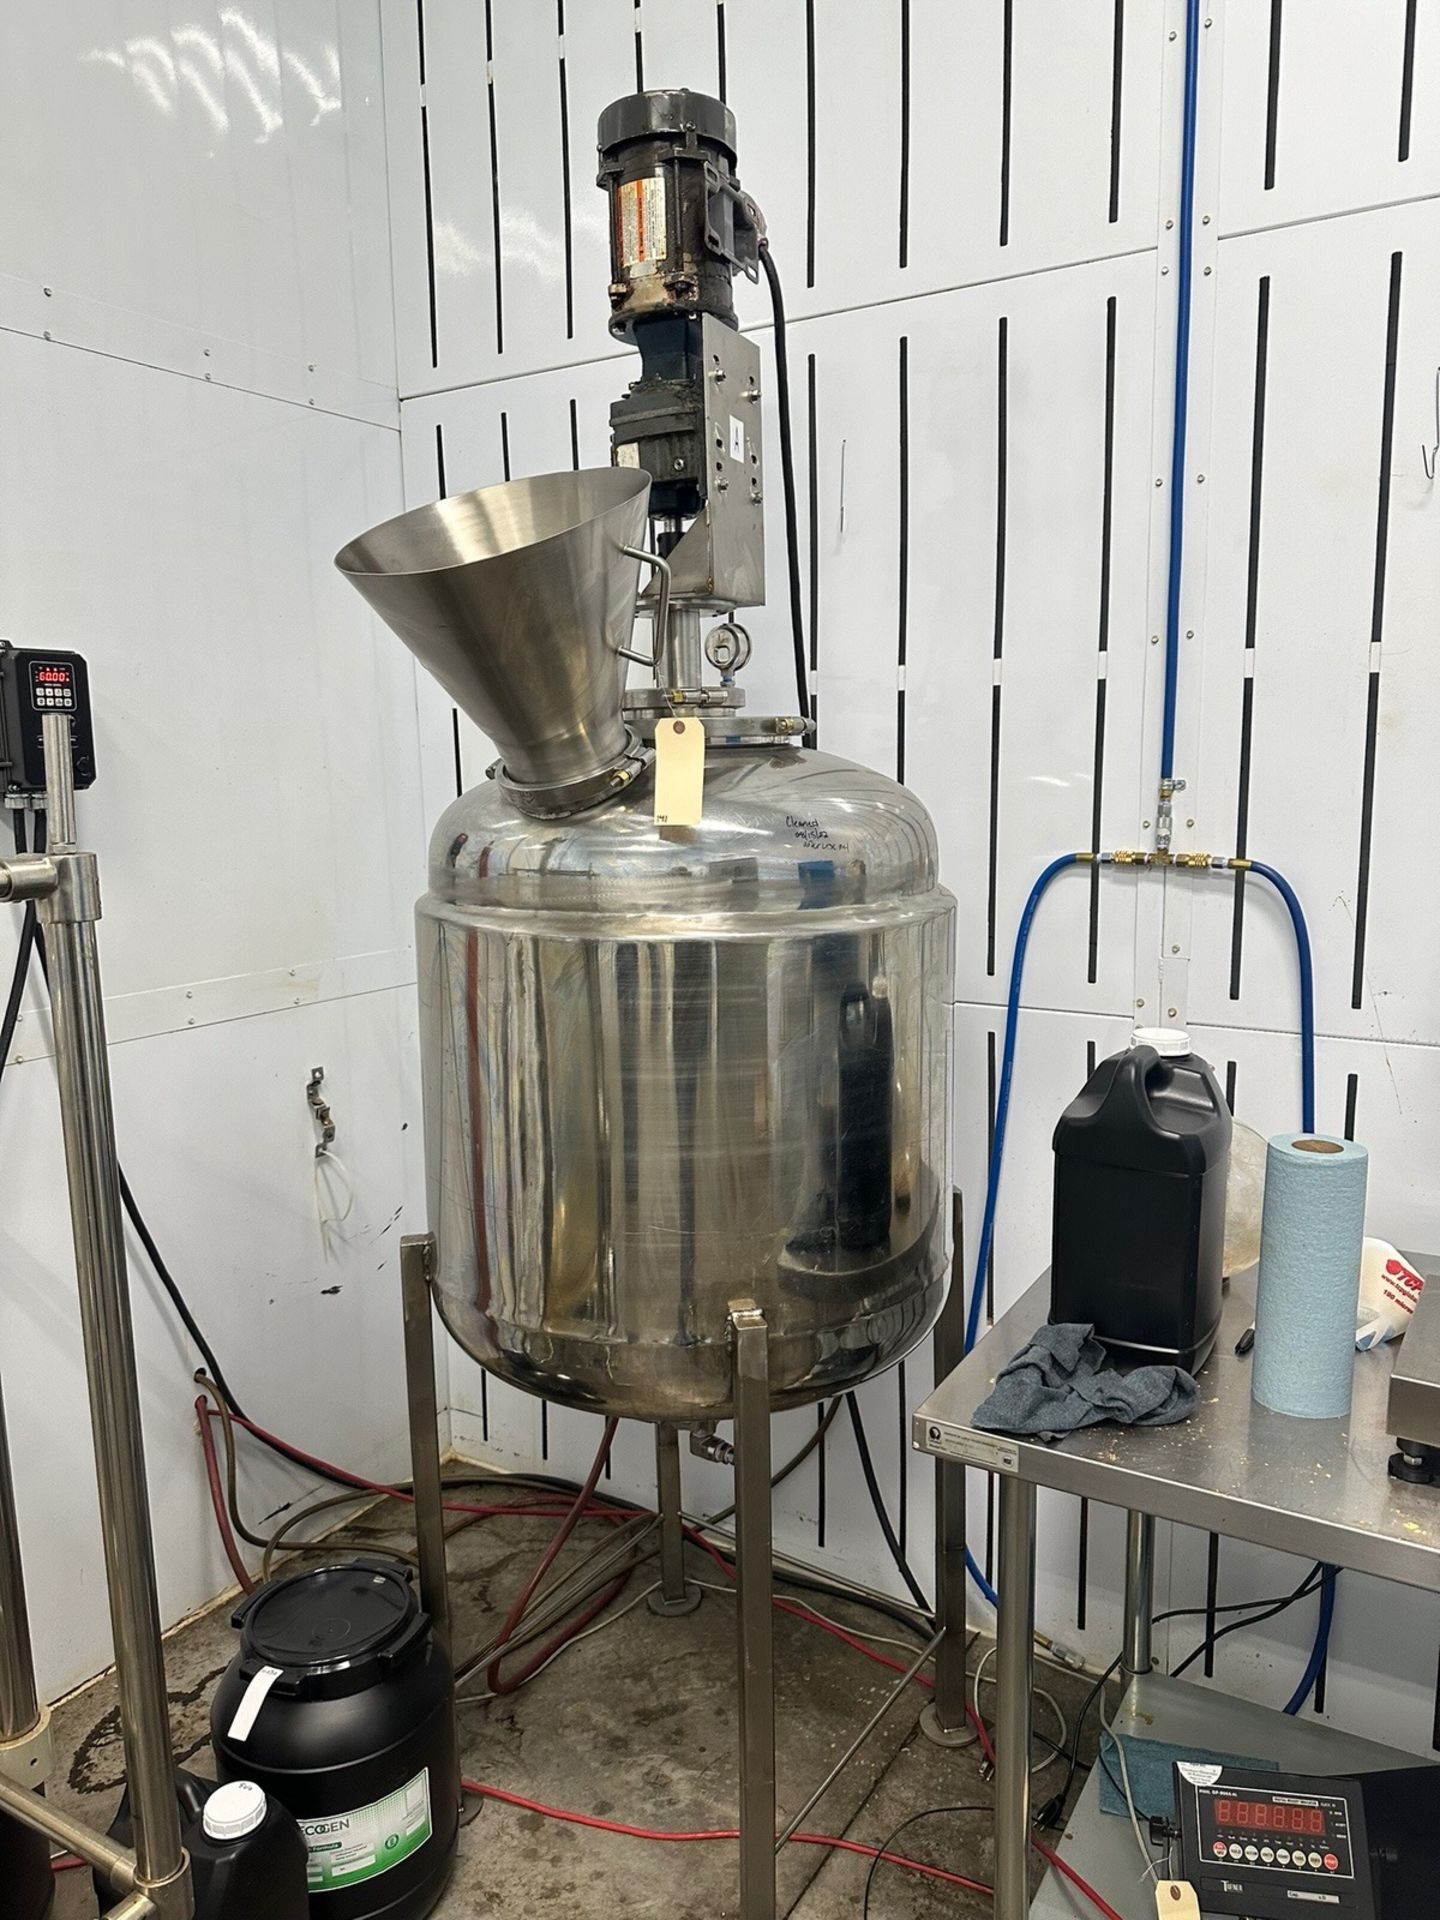 Stainless Steel Pressure Vessel With Agitation, Approx. 300L | Rig Fee $125